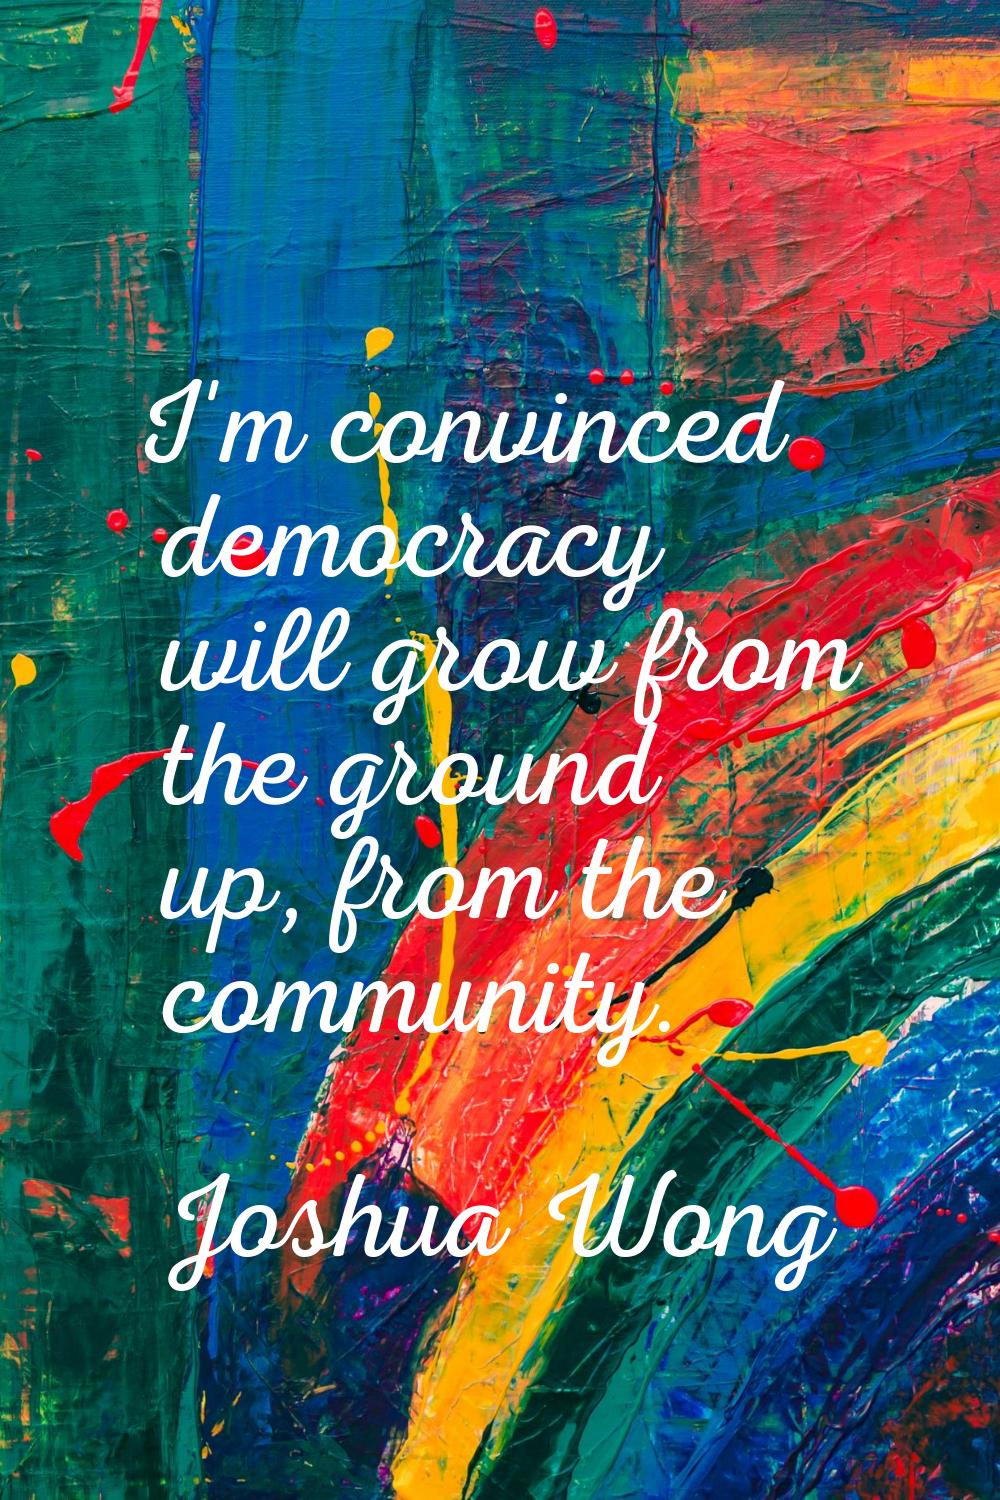 I'm convinced democracy will grow from the ground up, from the community.